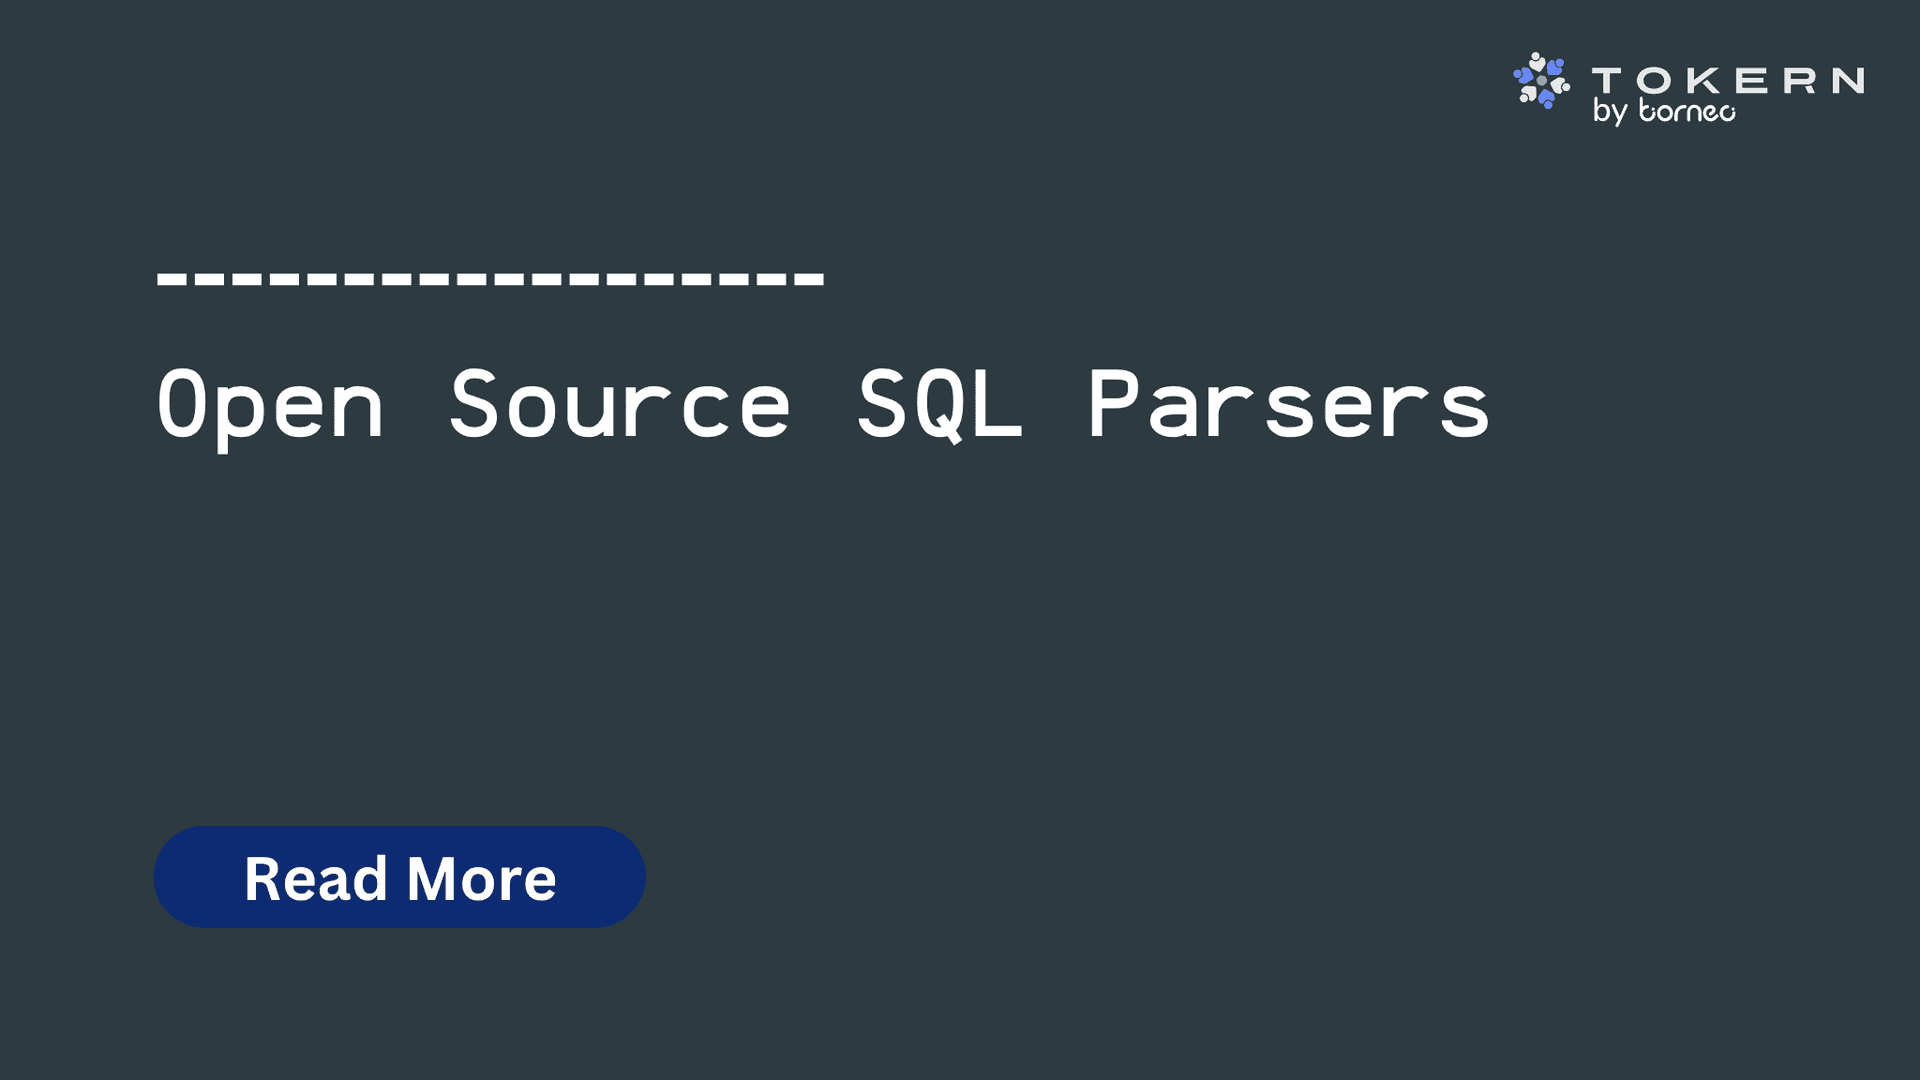 Open_Source_SQL_Parsers_0bd86359d0.png